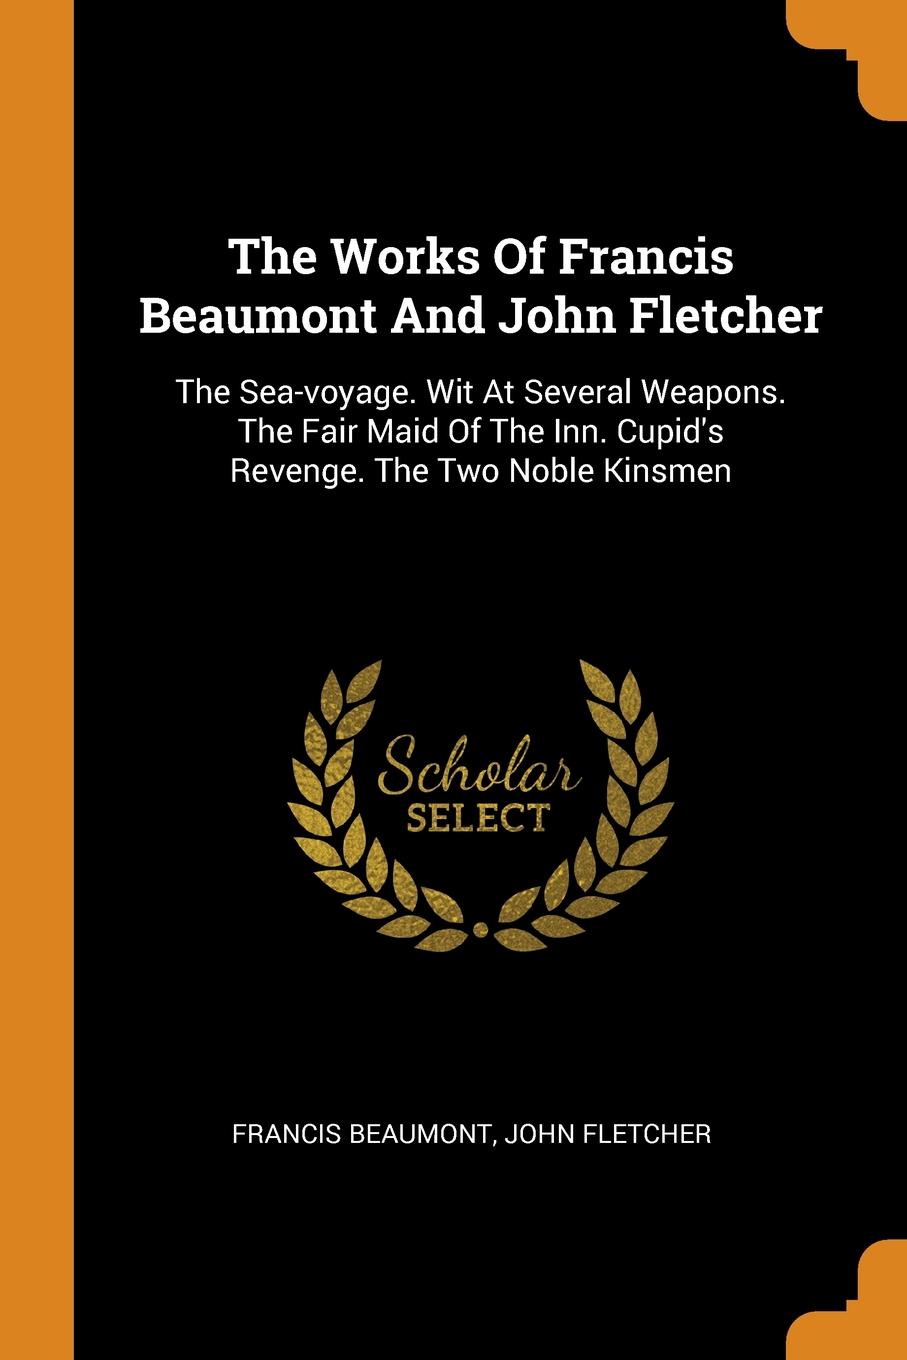 The Works Of Francis Beaumont And John Fletcher. The Sea-voyage. Wit At Several Weapons. The Fair Maid Of The Inn. Cupid.s Revenge. The Two Noble Kinsmen